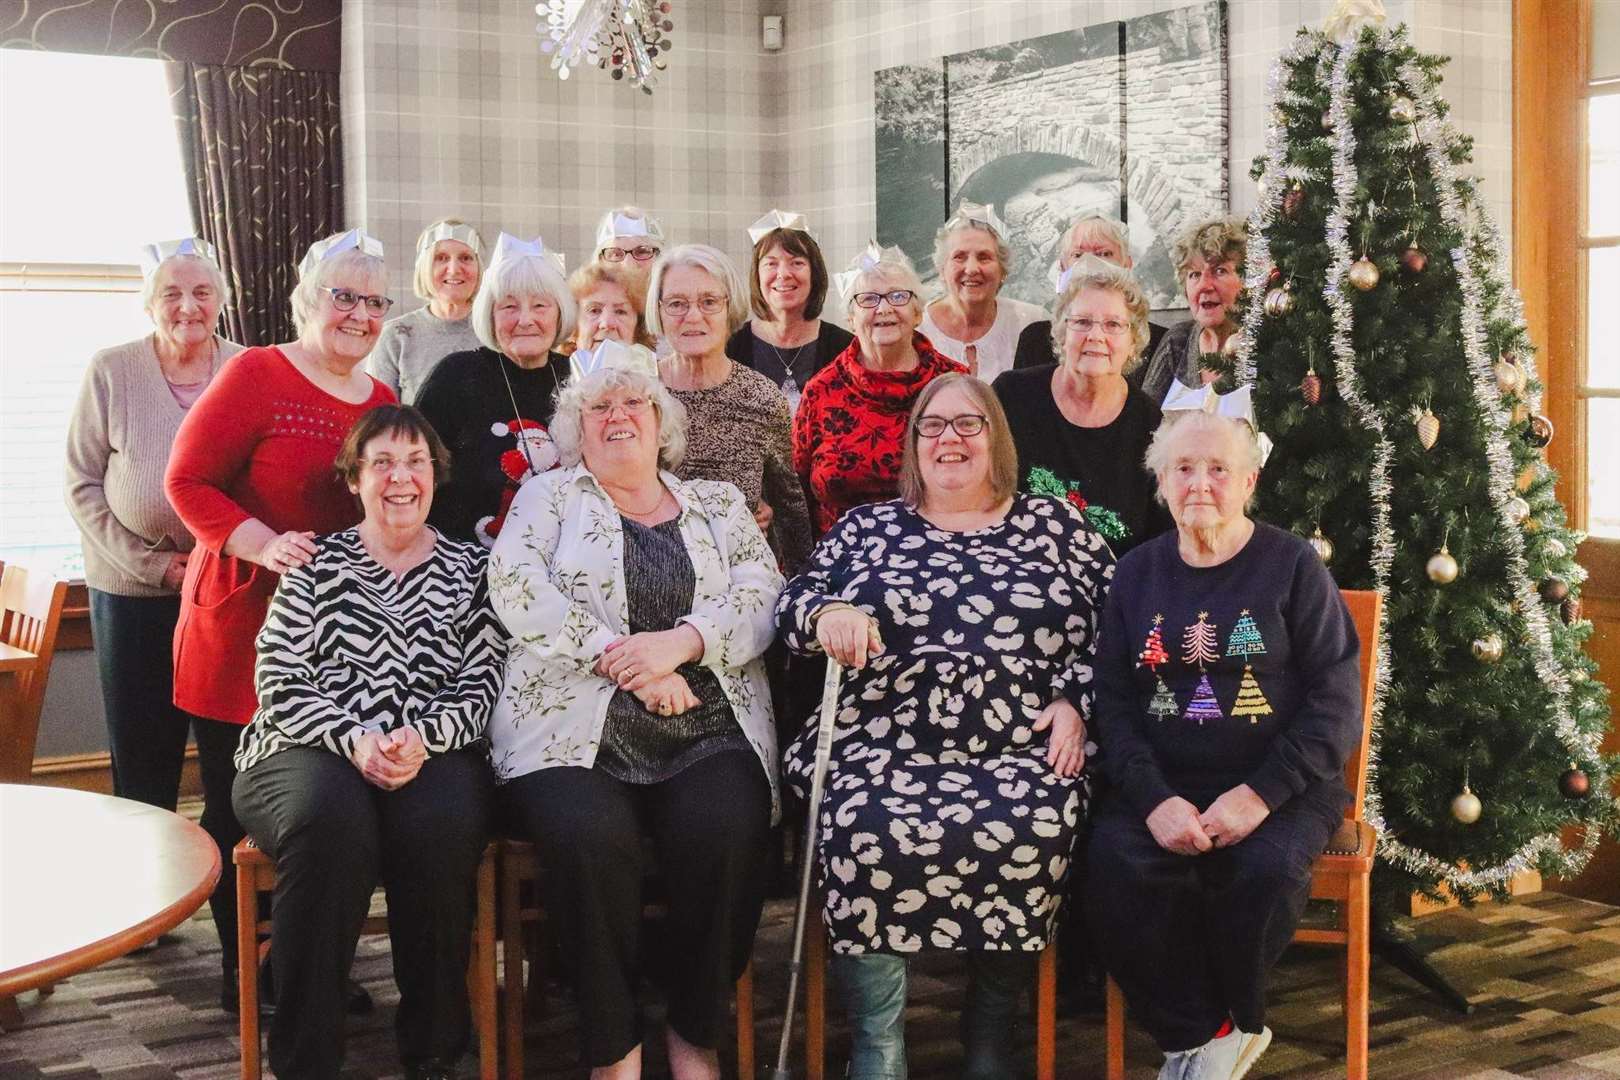 Ellon Knit And Natter enjoyed a delicious lunch in the Buchan Hotel to celebrate the end of the year.